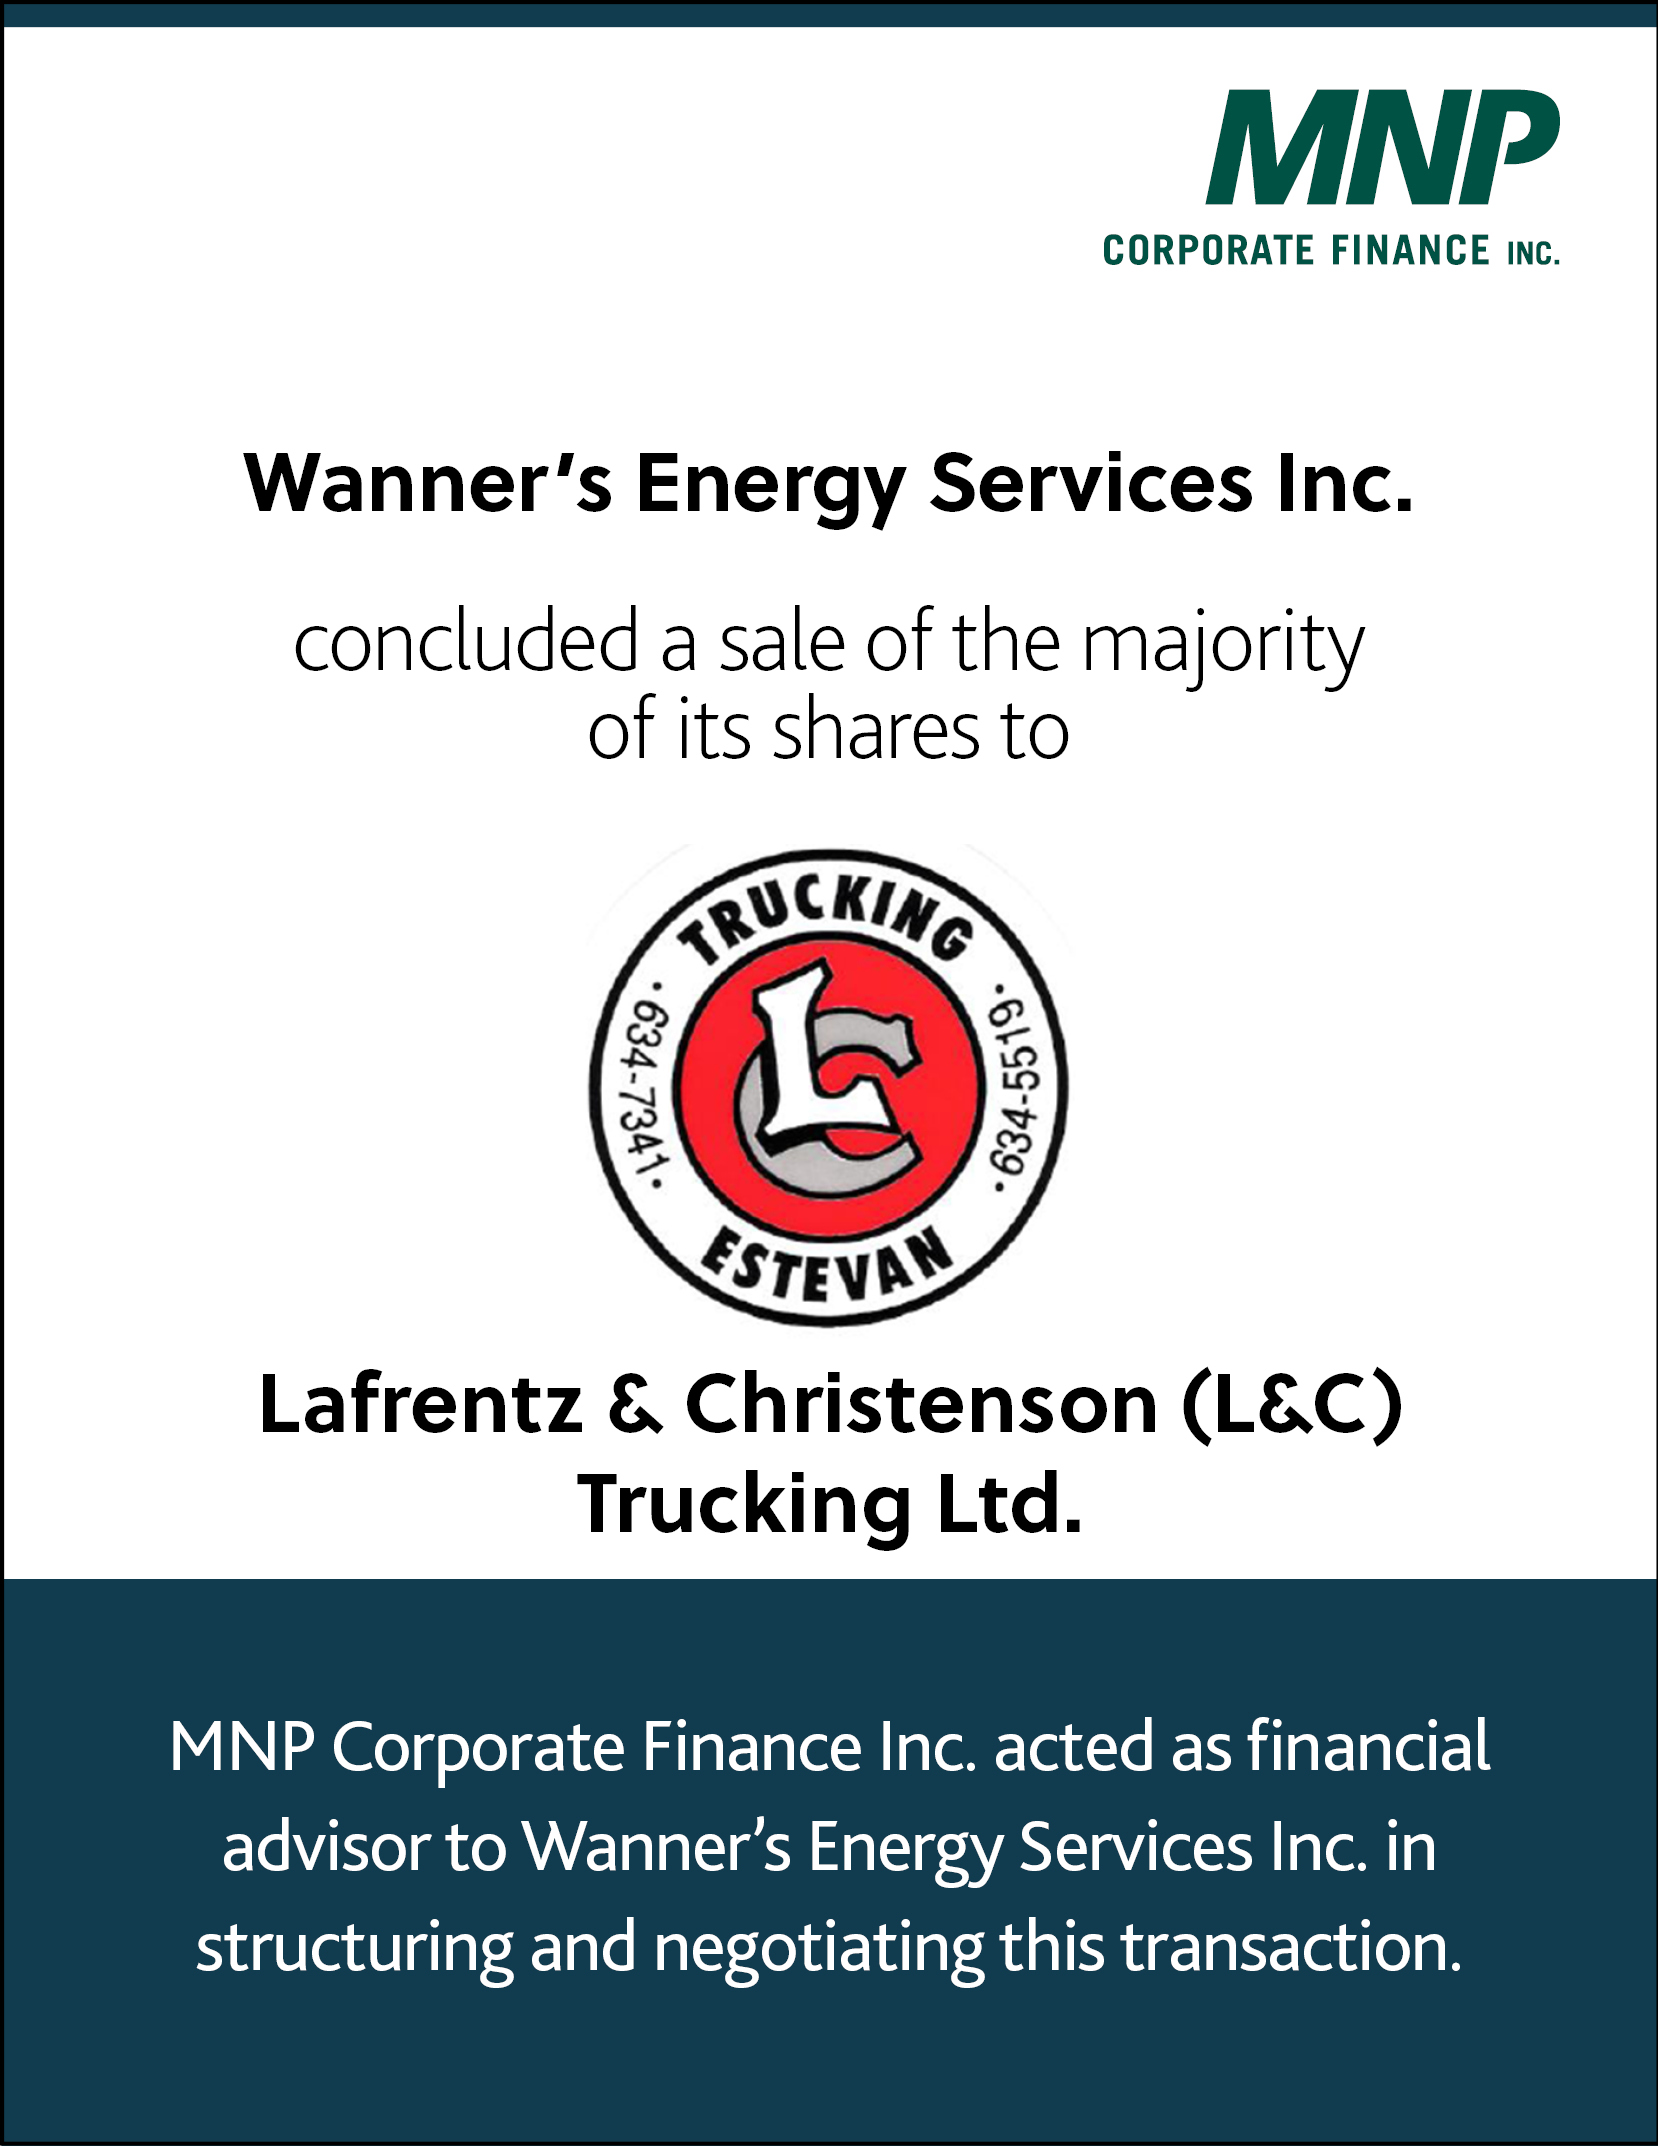 Wanner's Energy Services Inc concluded a sale of the majority of its shares to Lafrentz & Christenson (L&C) Trucking Ltd.